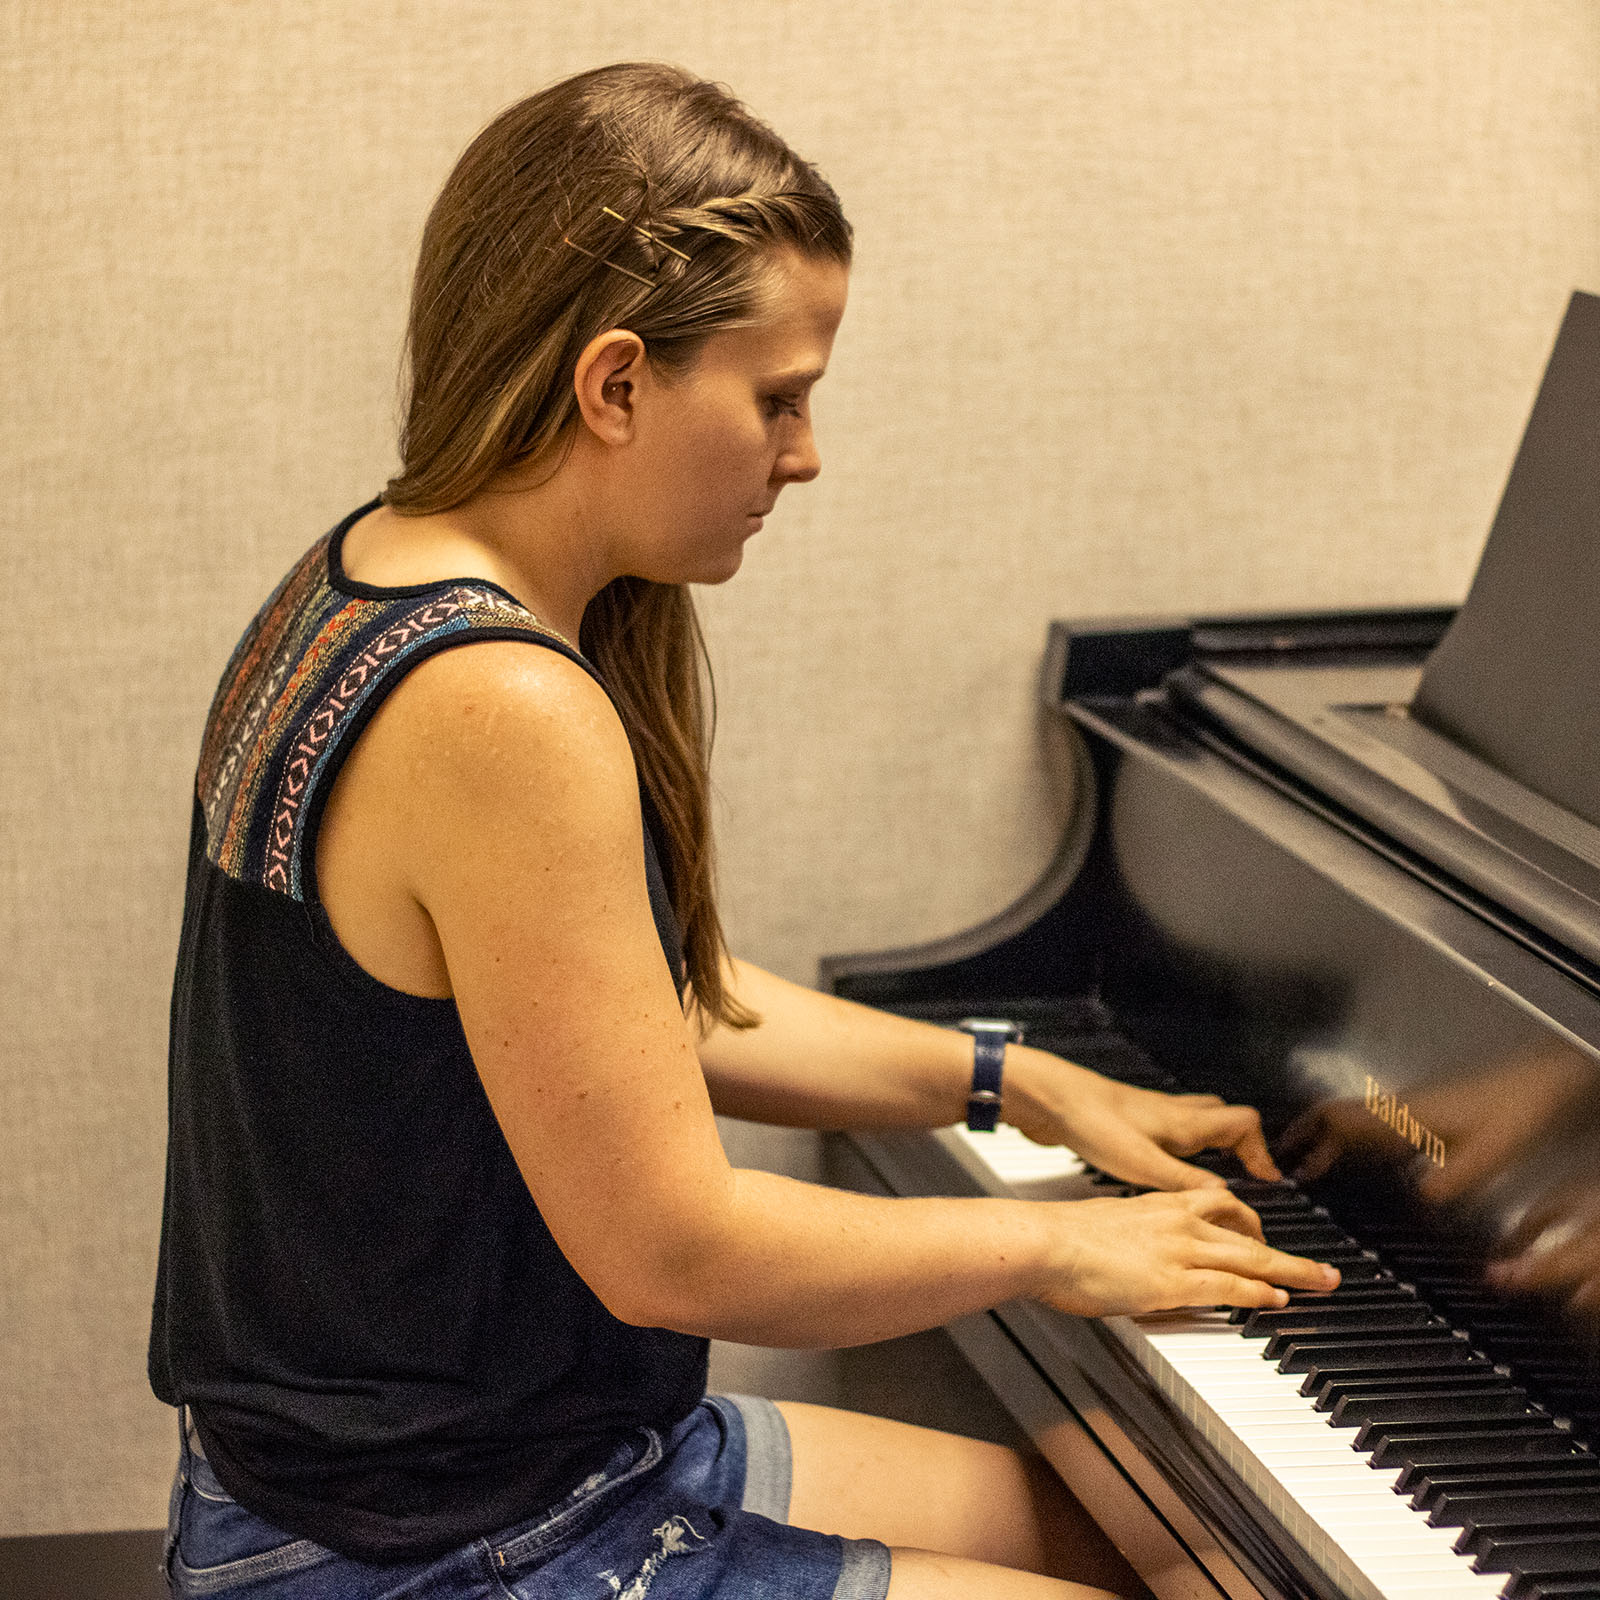 A female student focuses on playing the piano.